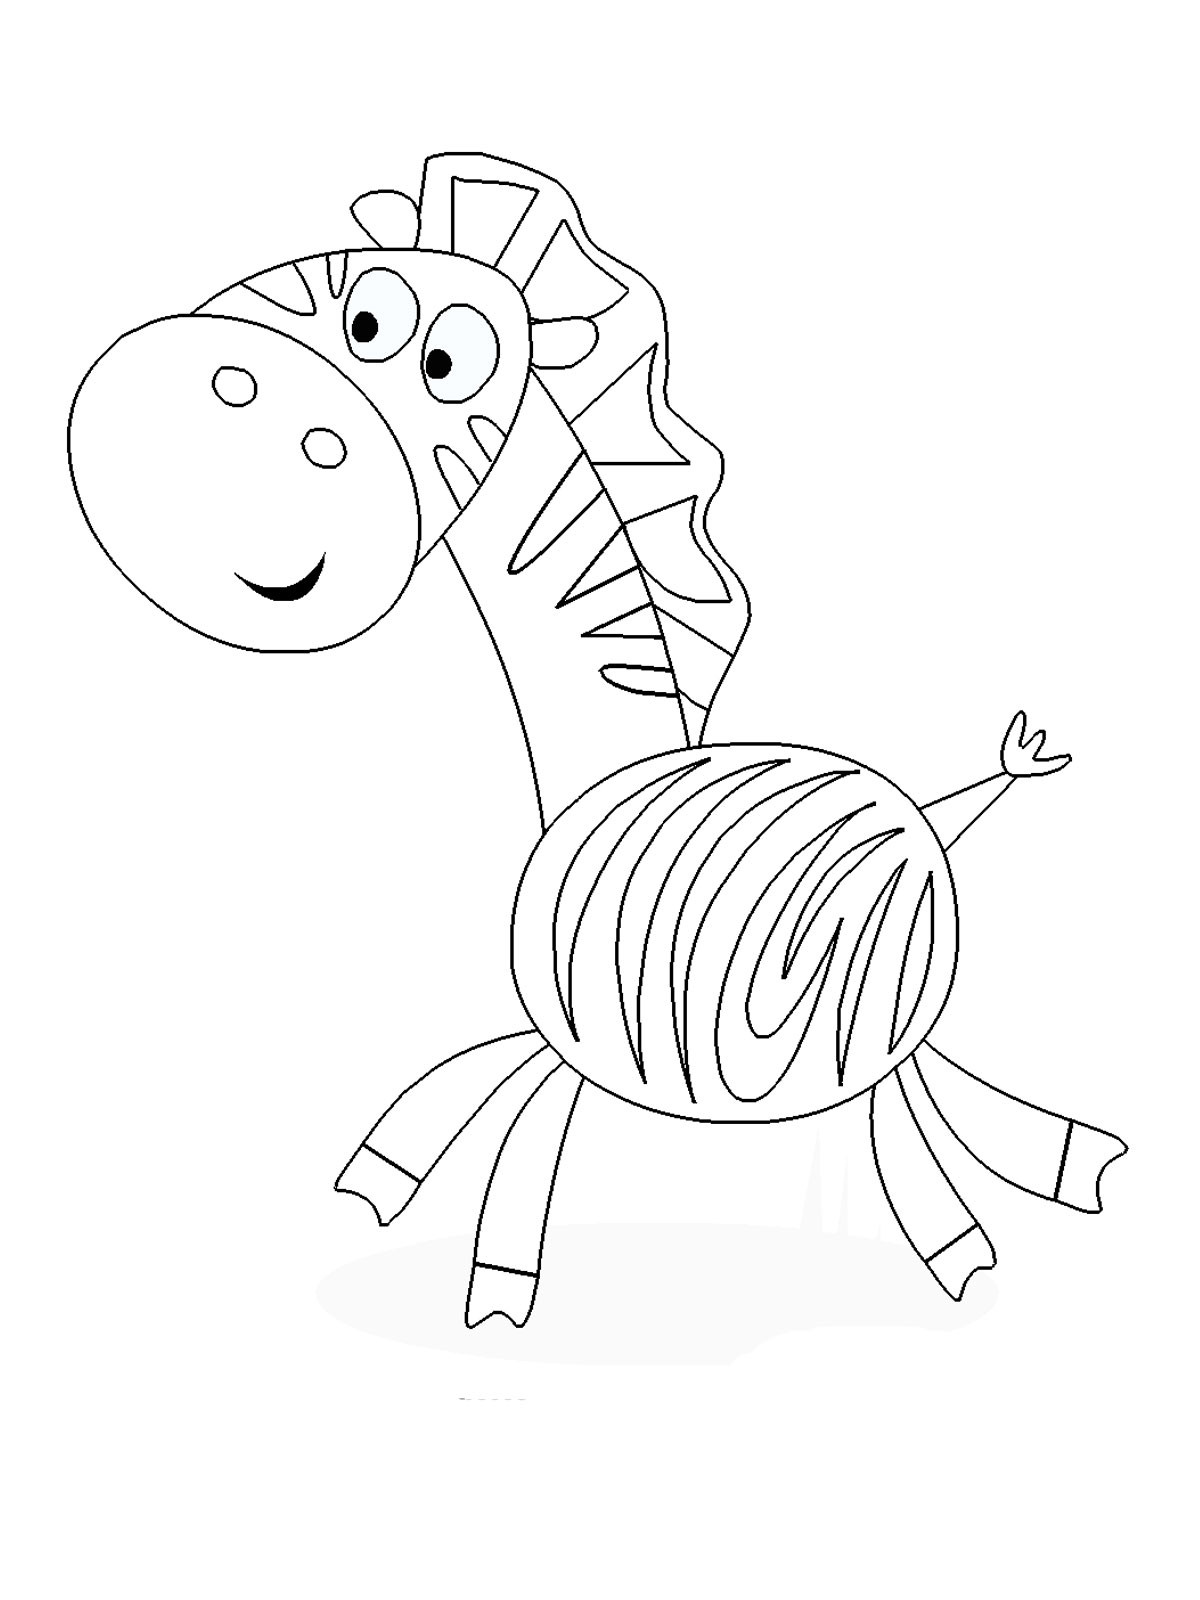 Printable Coloring Pages For Kids
 Printable coloring pages for kids